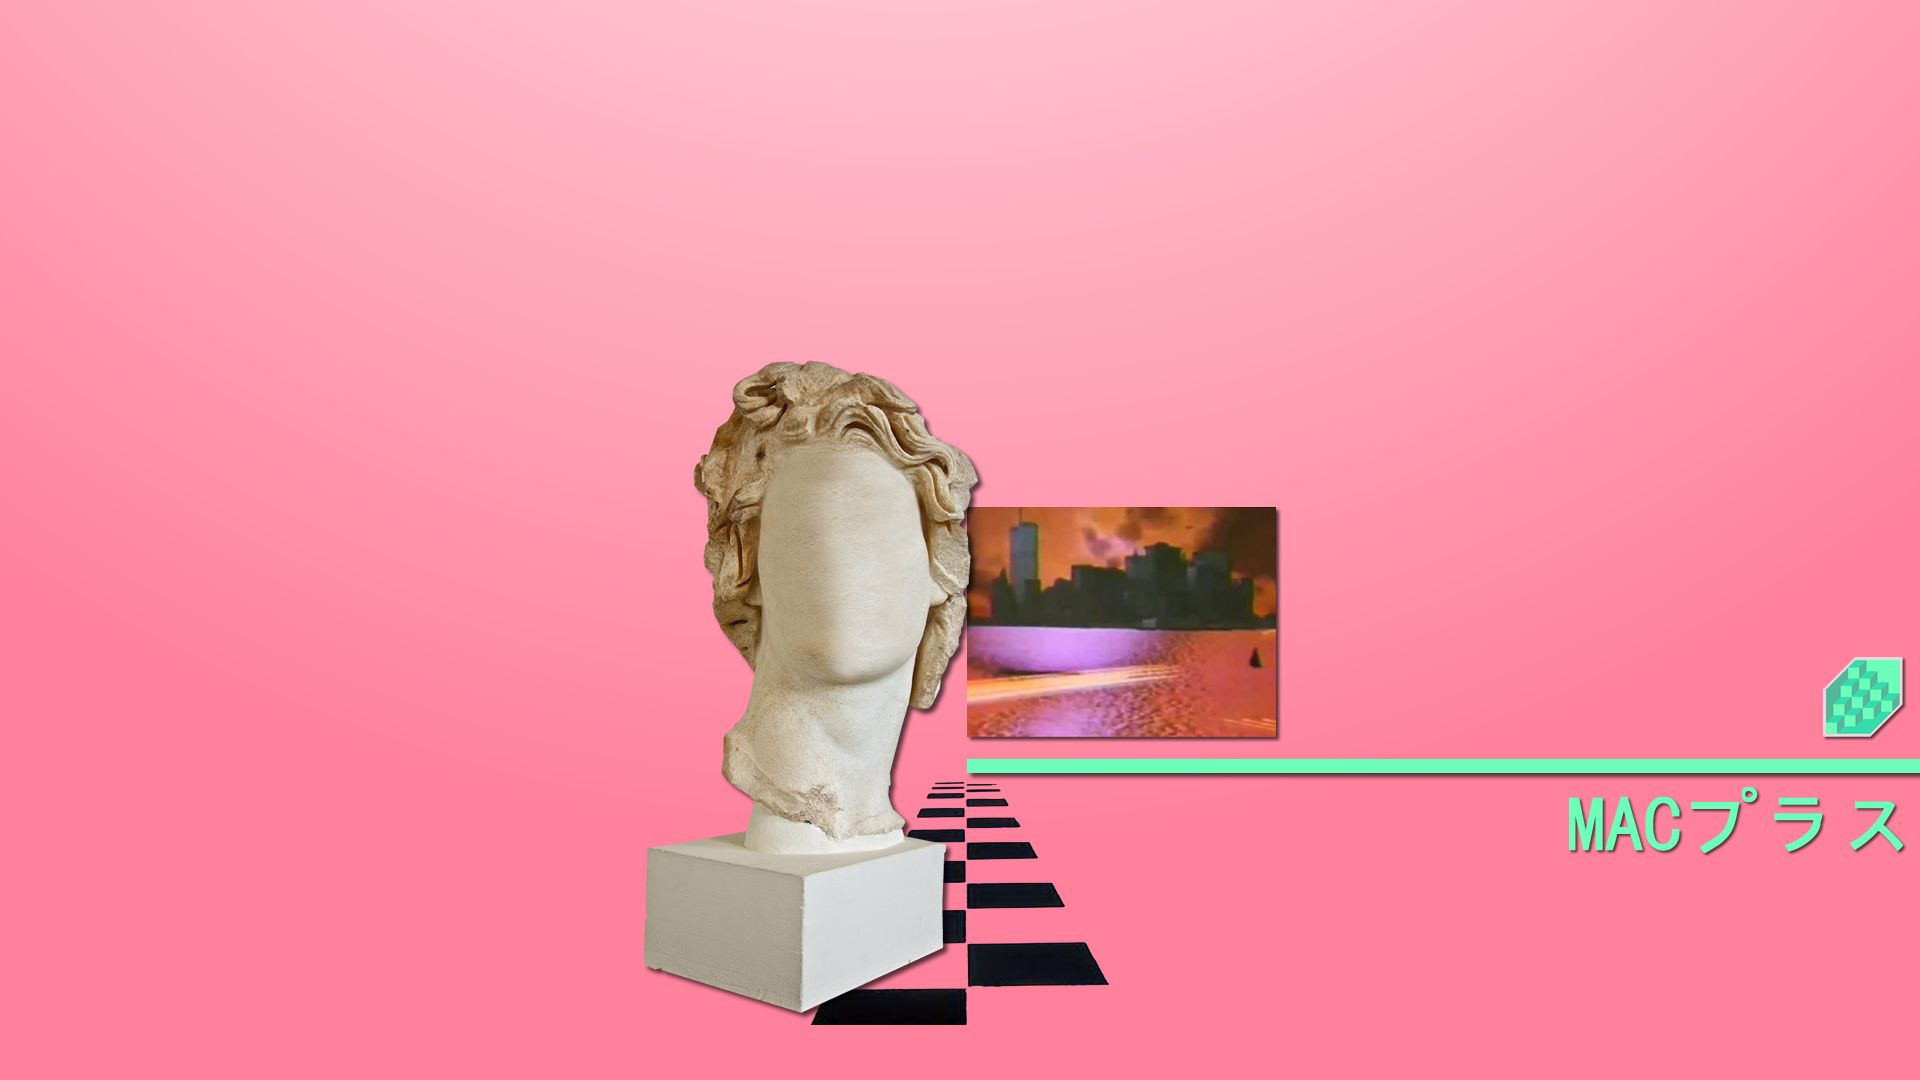 Aesthetic statue of a man's head on a pink background - Windows 95